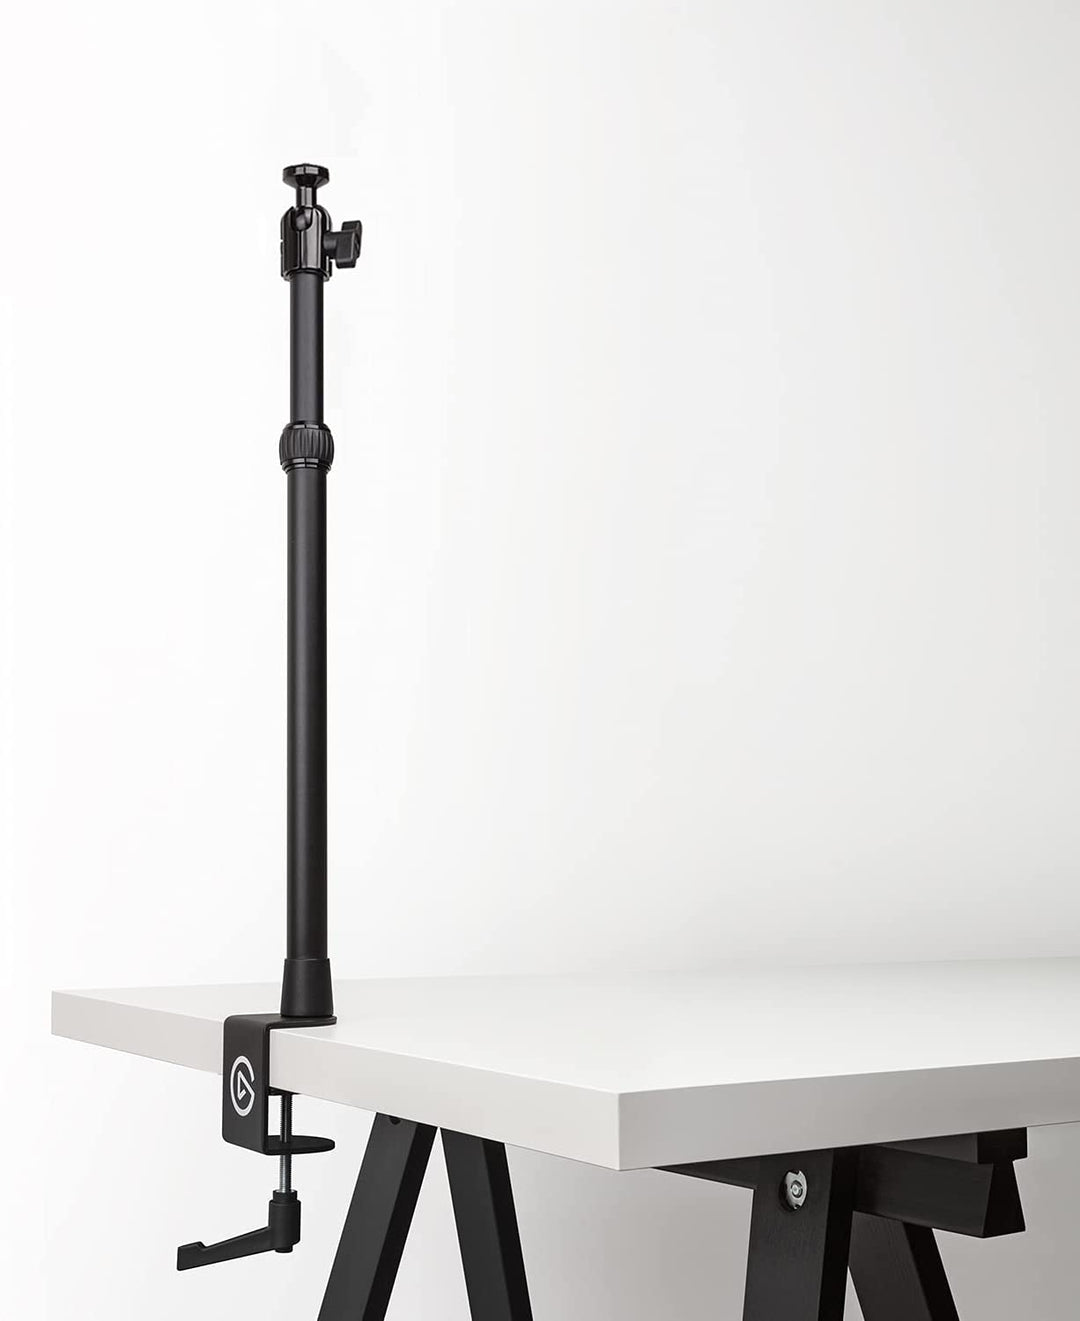 Elgato Master Mount S – Main Pole Extendable Up to 54 cm / 21 in, Multi Mount Essential (Works with Multi Mount Accessories)